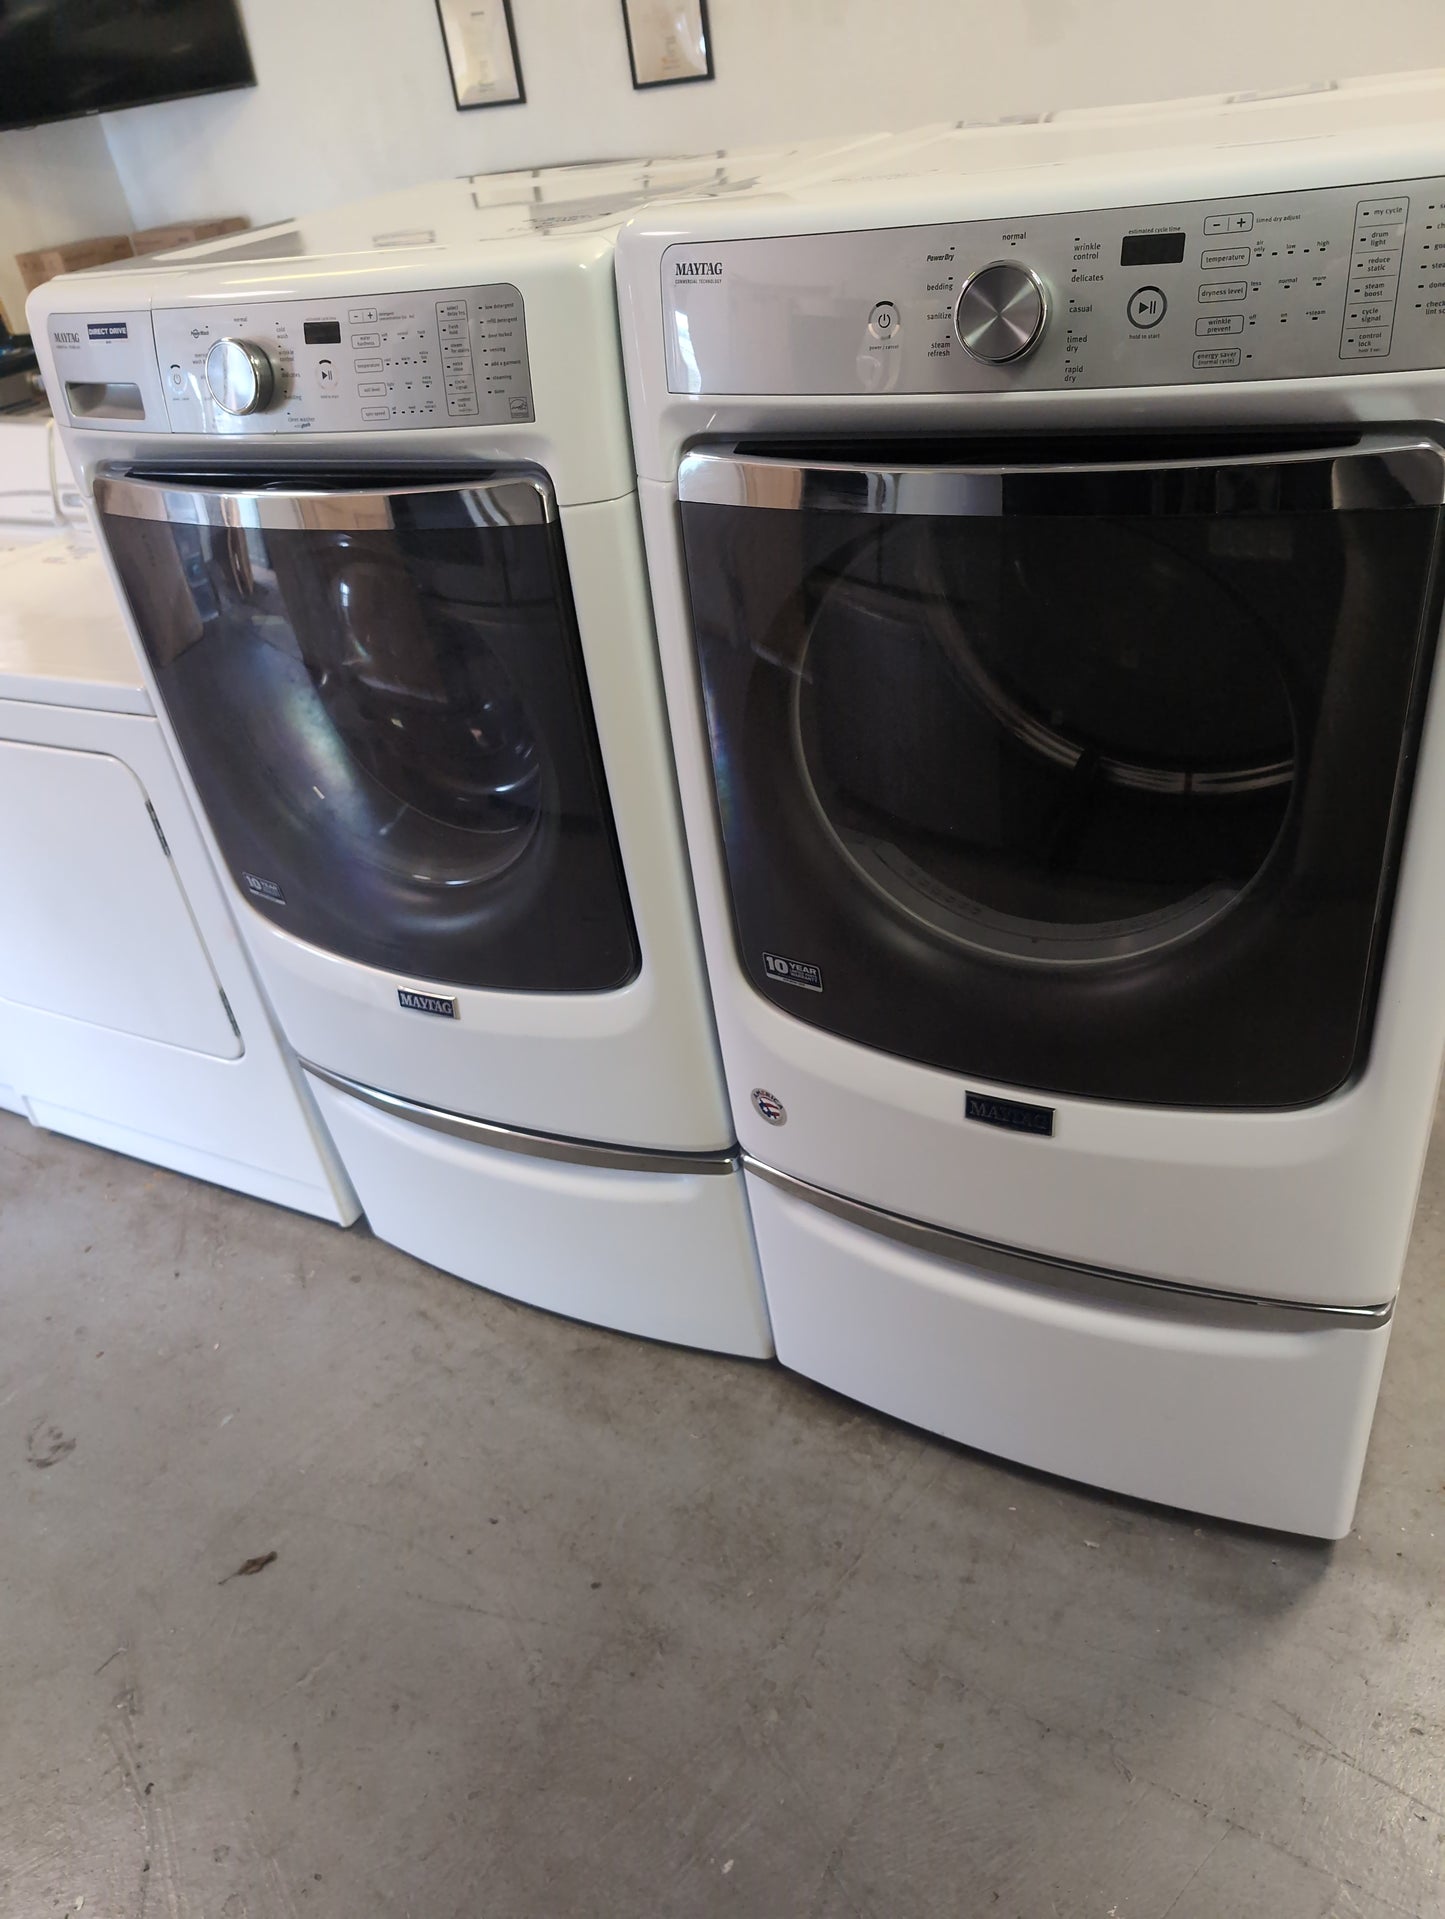 Used Maytag direct drive 4.6 cubic foot front load washer with 7.4 cubic foot electric dryer set on pedestals